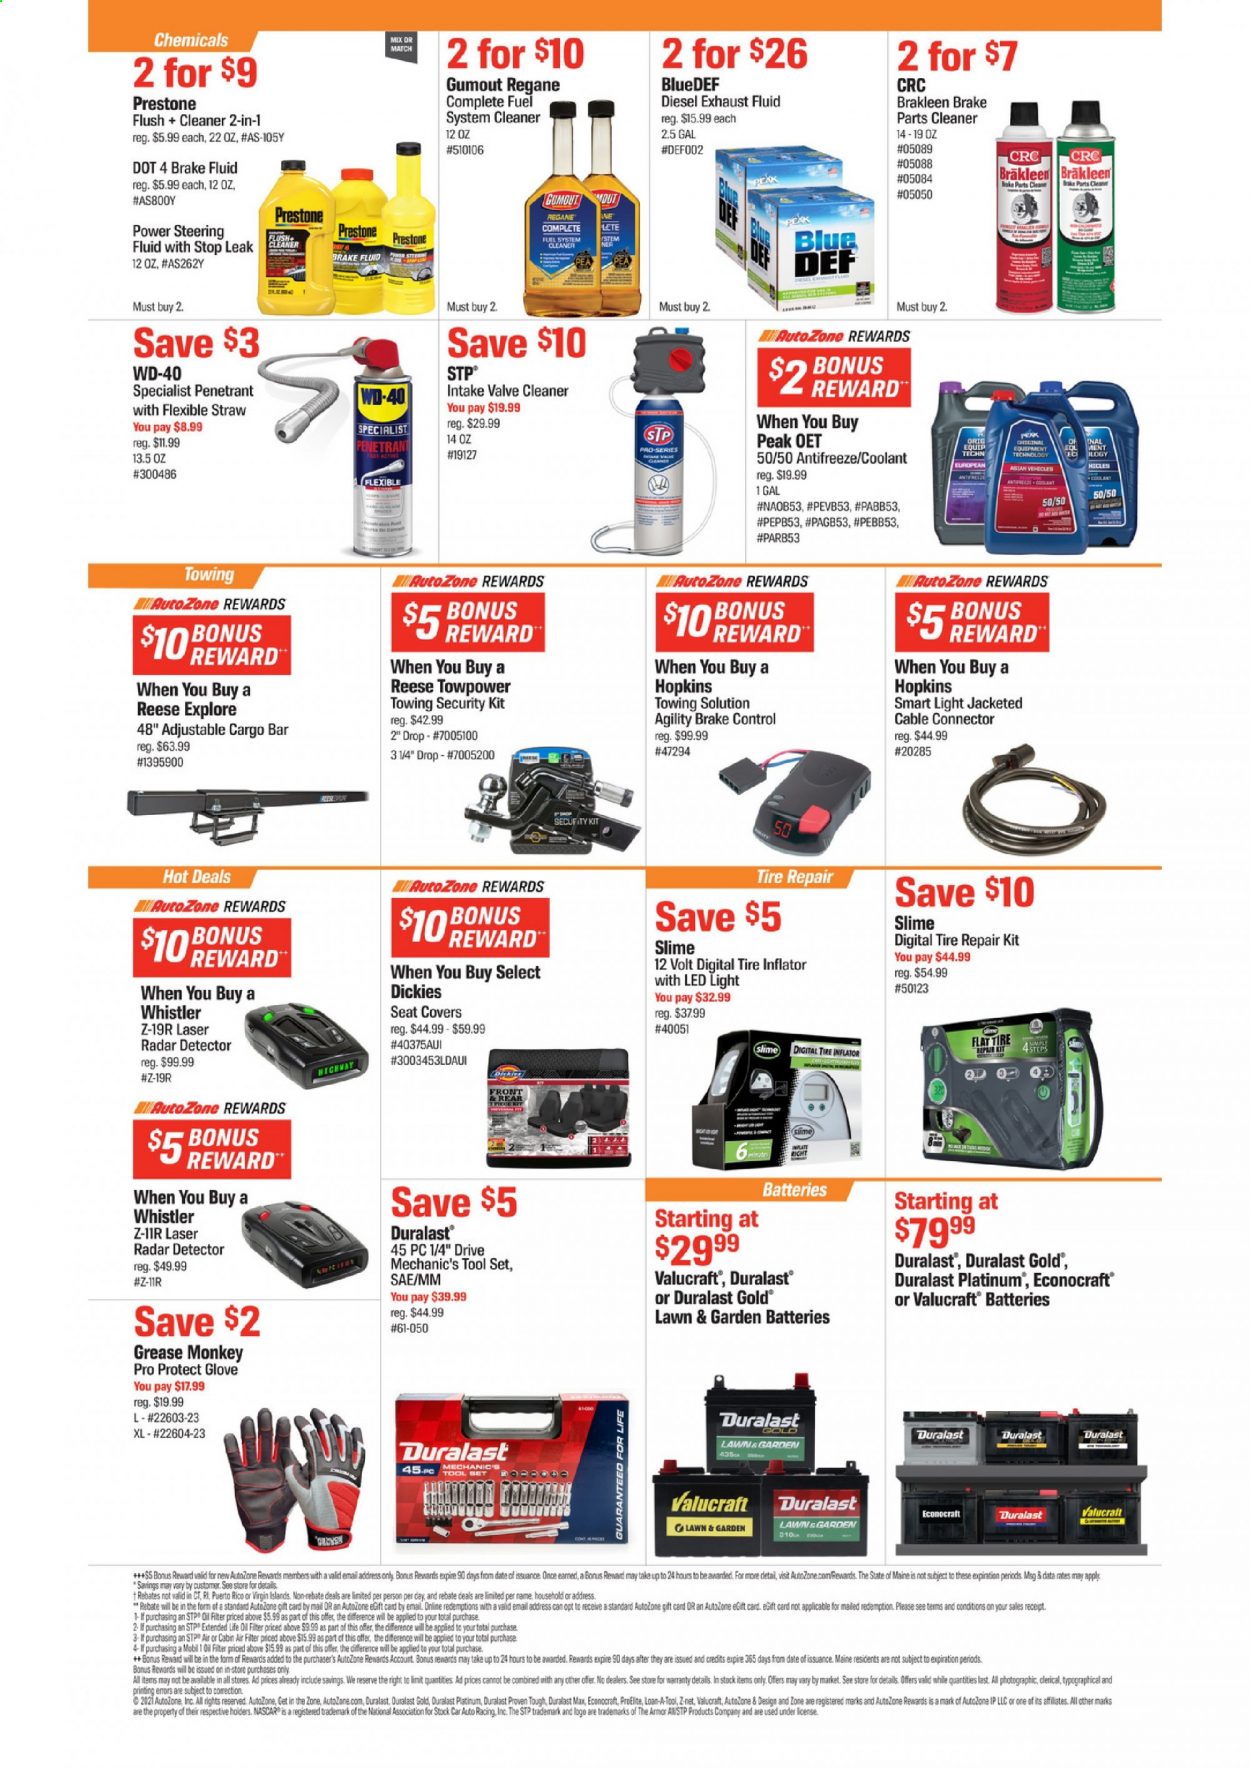 thumbnail - Autozone Flyer - 06/01/2021 - 06/28/2021 - Sales products - battery, monkey, Slime, tool set, Dickies, gloves, mechanic's tools, WD-40, tire inflator, car seat cover, Duralast, Reese Towpower, brake cleaner, fuel system cleaner, cleaner, antifreeze, STP, valve cleaner, Mobil, Prestone, brake fluid, exhaust fluid, steering fluid, Gumout. Page 2.